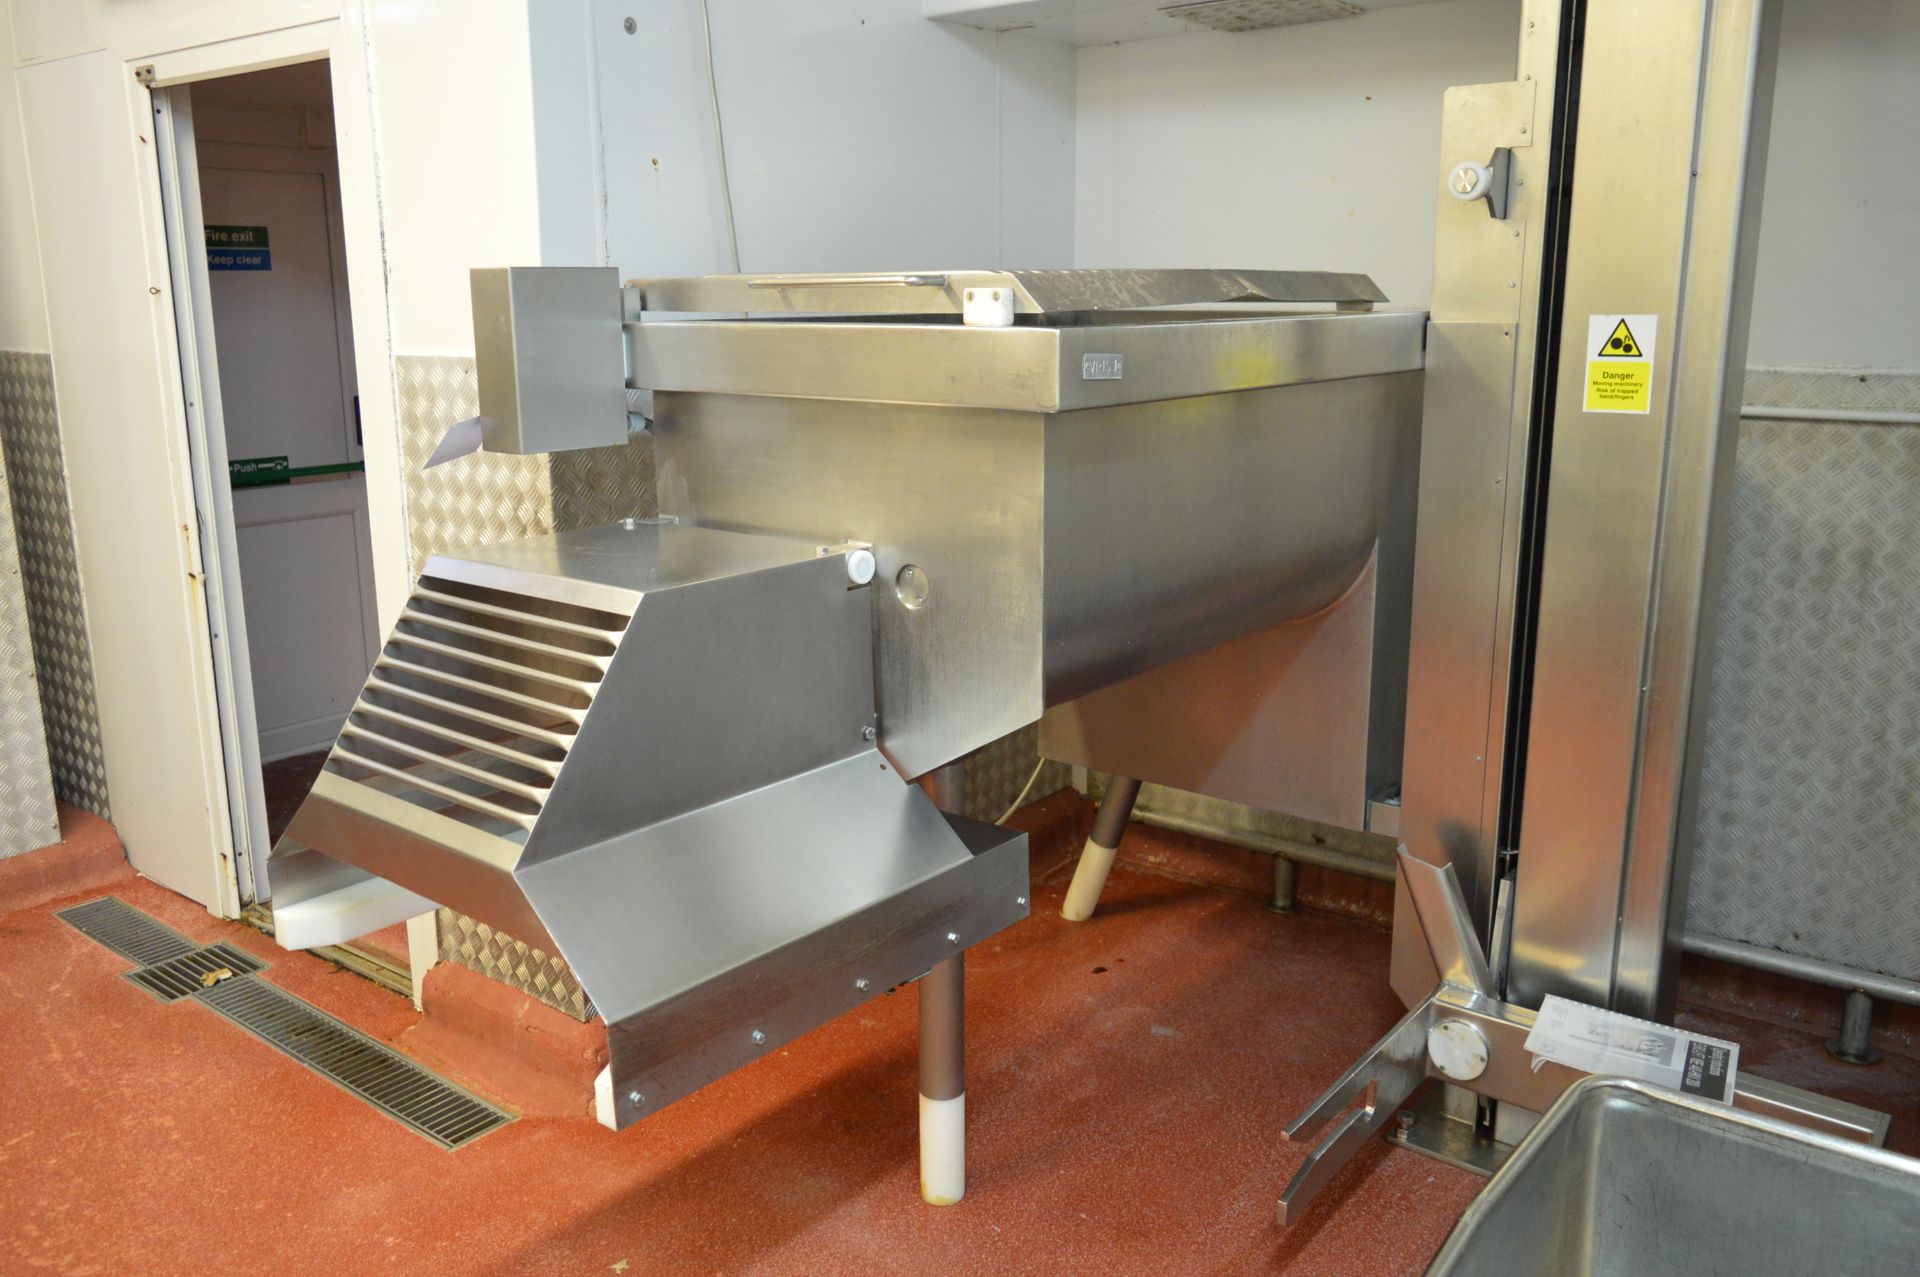 Risco, stainless steel mixer with Eurolift, lift column lift (Located at Crantock Bakery, Newquay) - Image 3 of 6